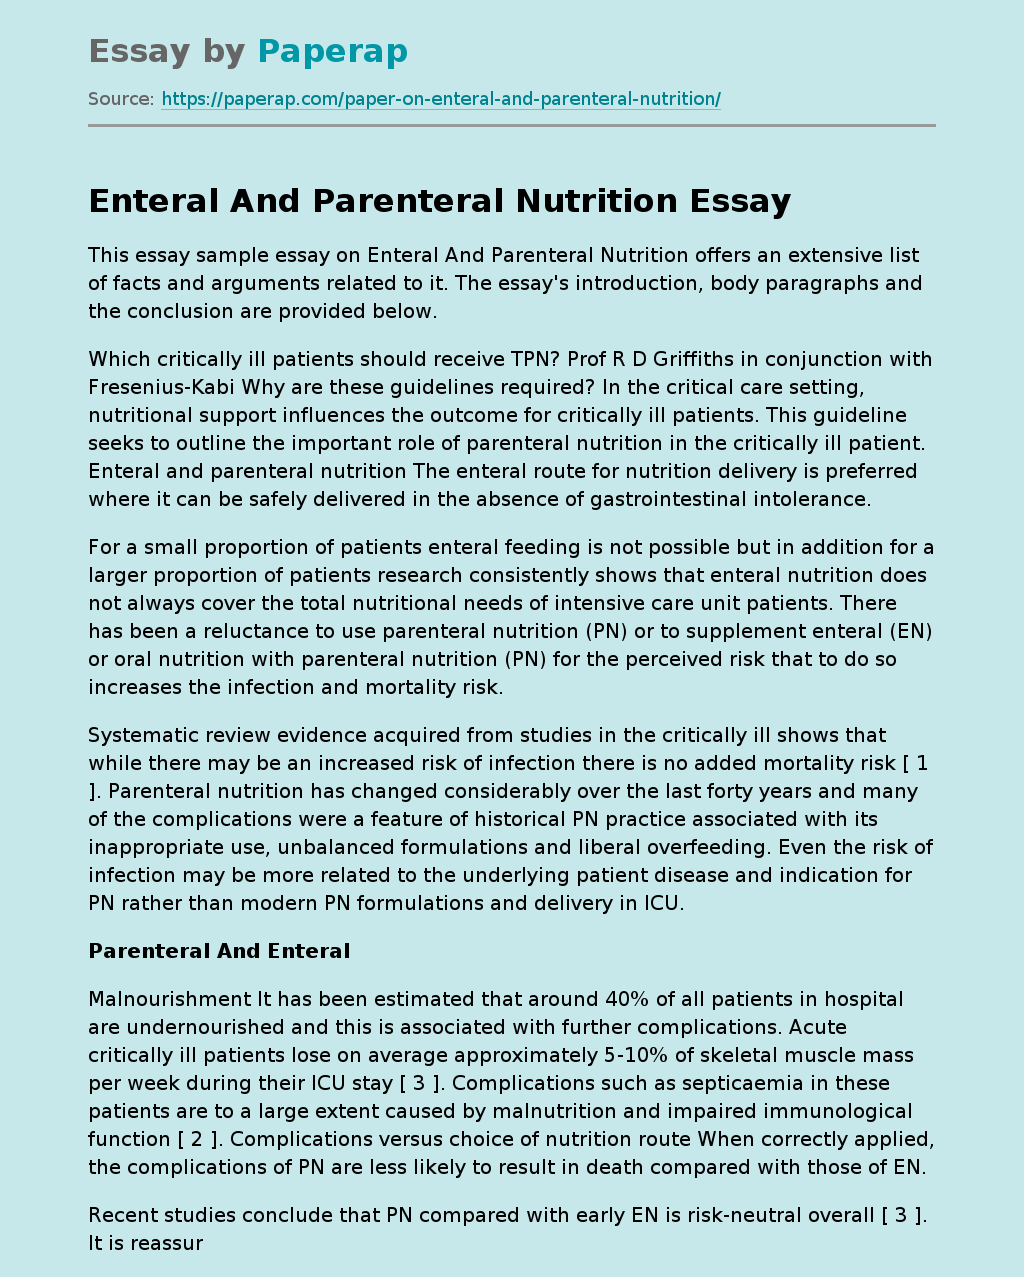 Enteral And Parenteral Nutrition